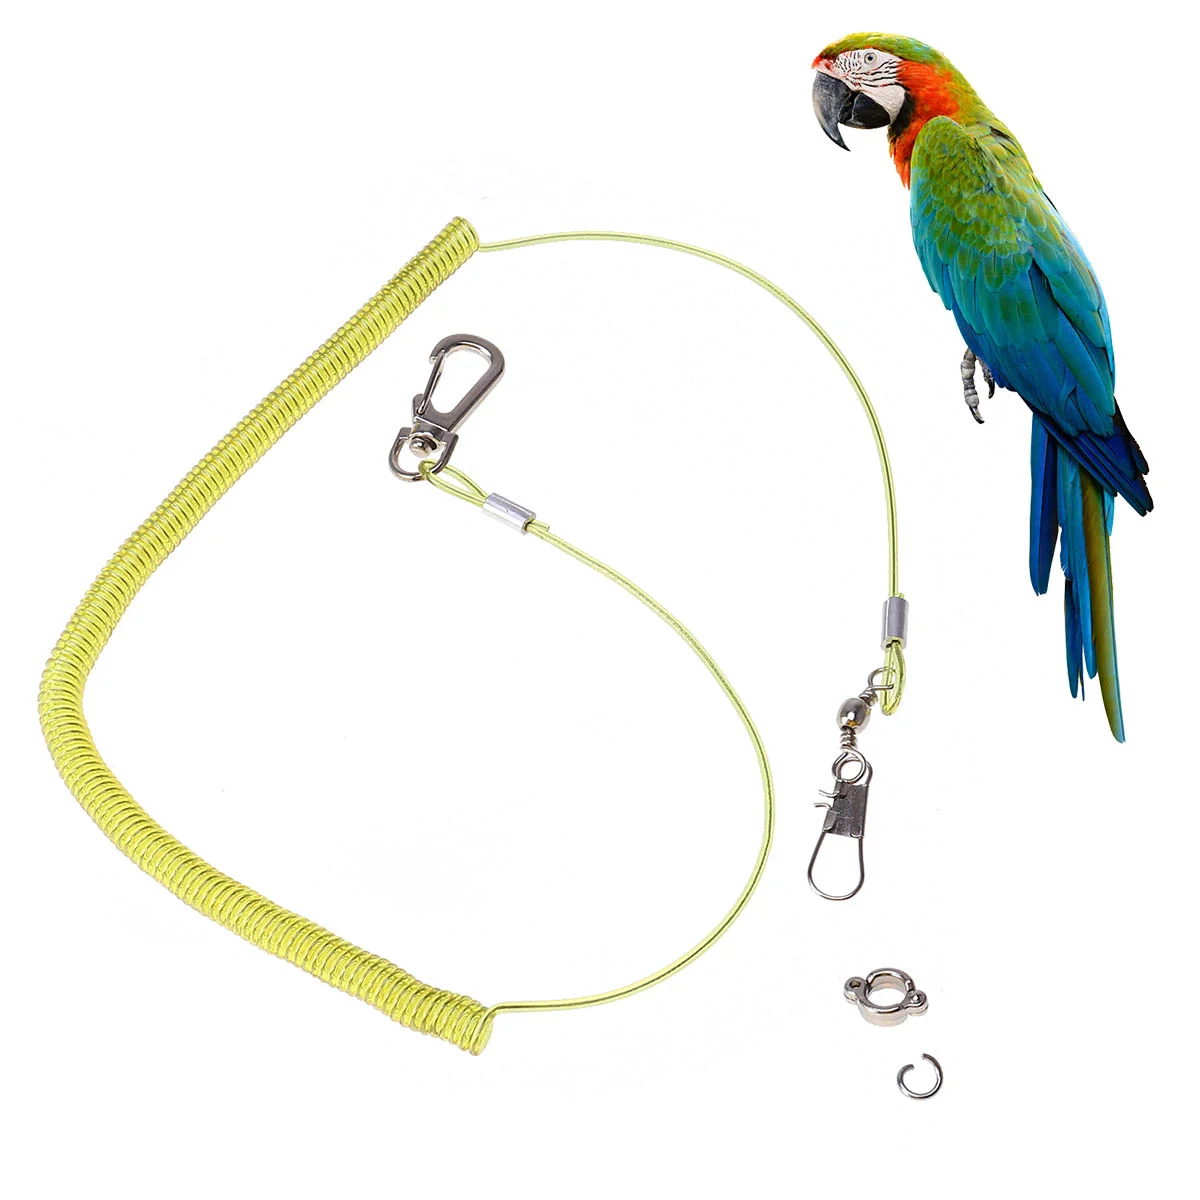 

3 Meters Adjustable Bird Leash Trainning Rope Flying Harness Anti-Bite Elastic String for Parrot Outdoor Activities - Claw